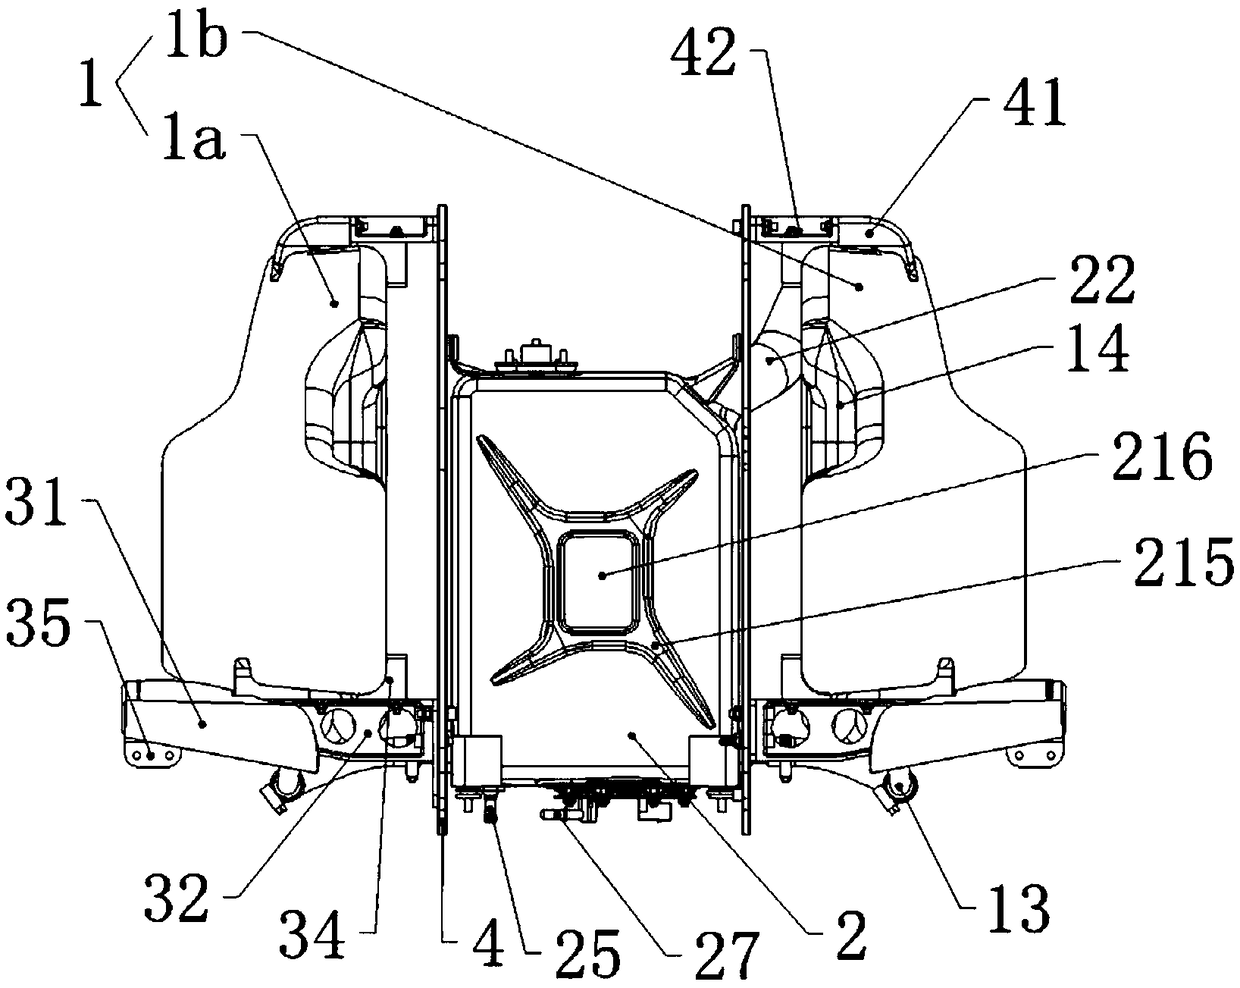 Helicopter fuel tank assembly and helicopter